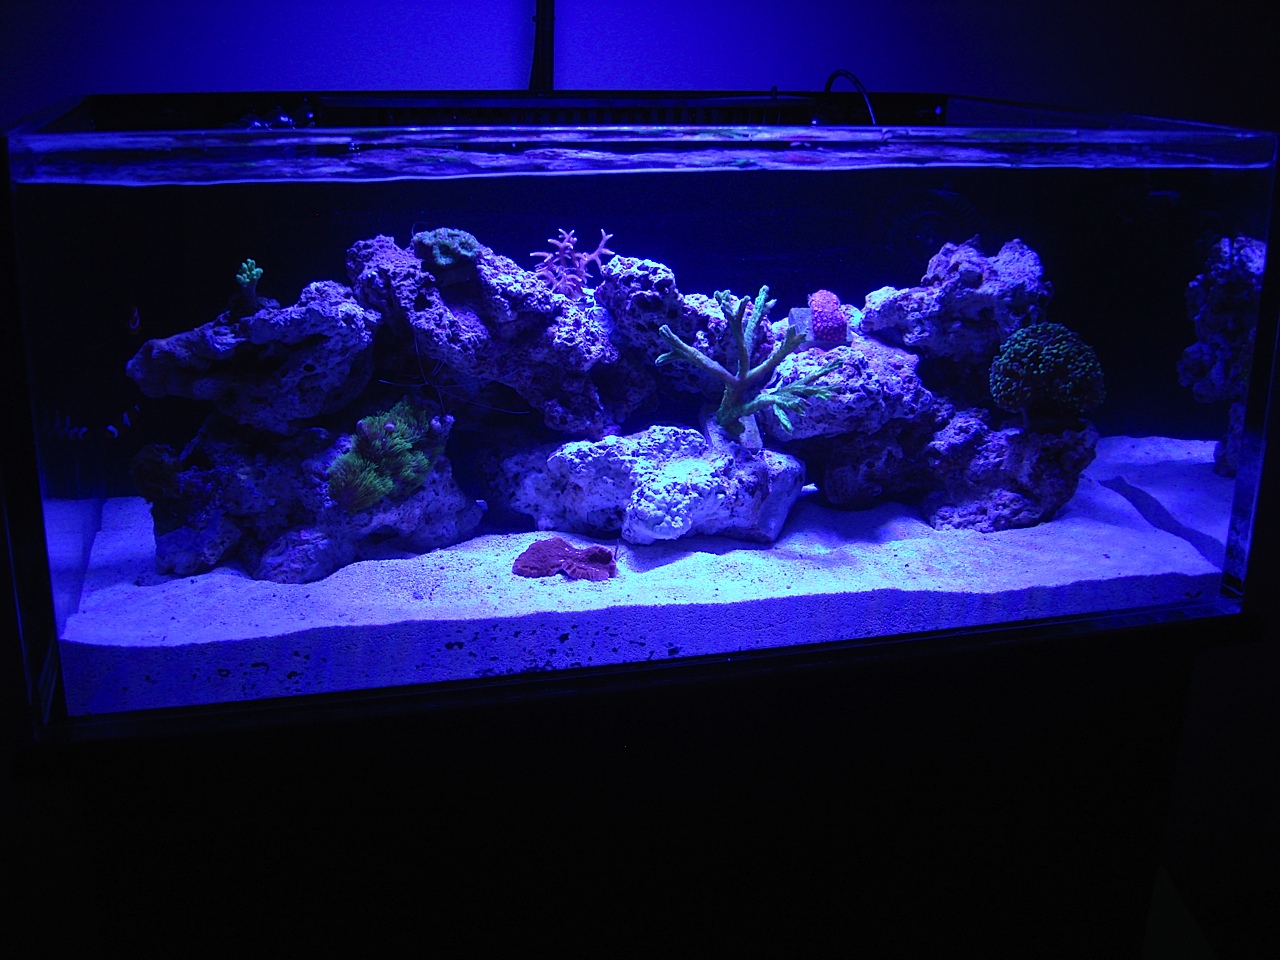 Moved from the nano to the new tank last weekend. Moonlights on at 80%